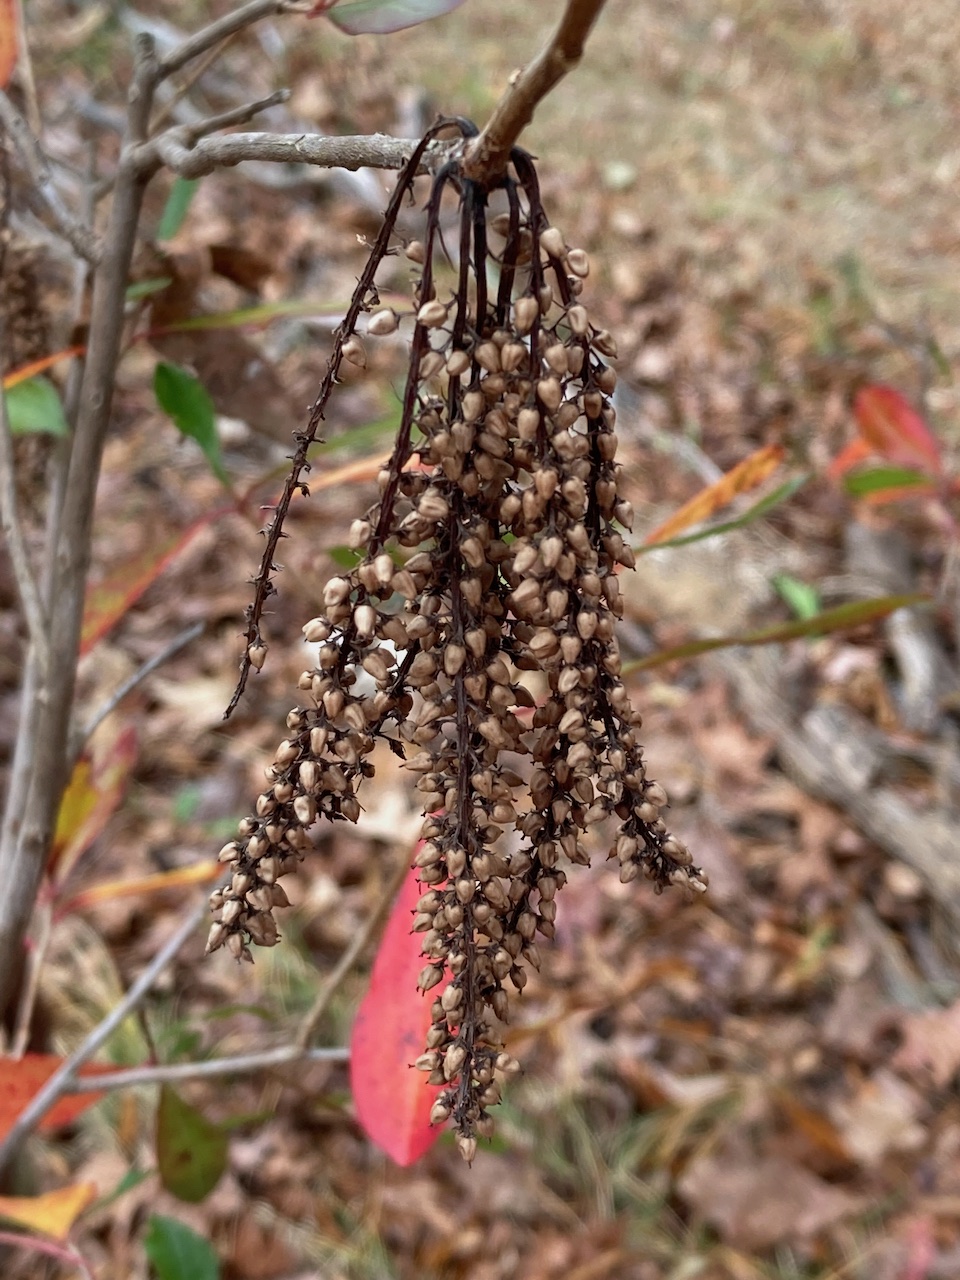 The Scientific Name is Cyrilla racemiflora. You will likely hear them called Swamp Titi, Swamp Cyrilla. This picture shows the Mature fruit (capsules) of Cyrilla racemiflora